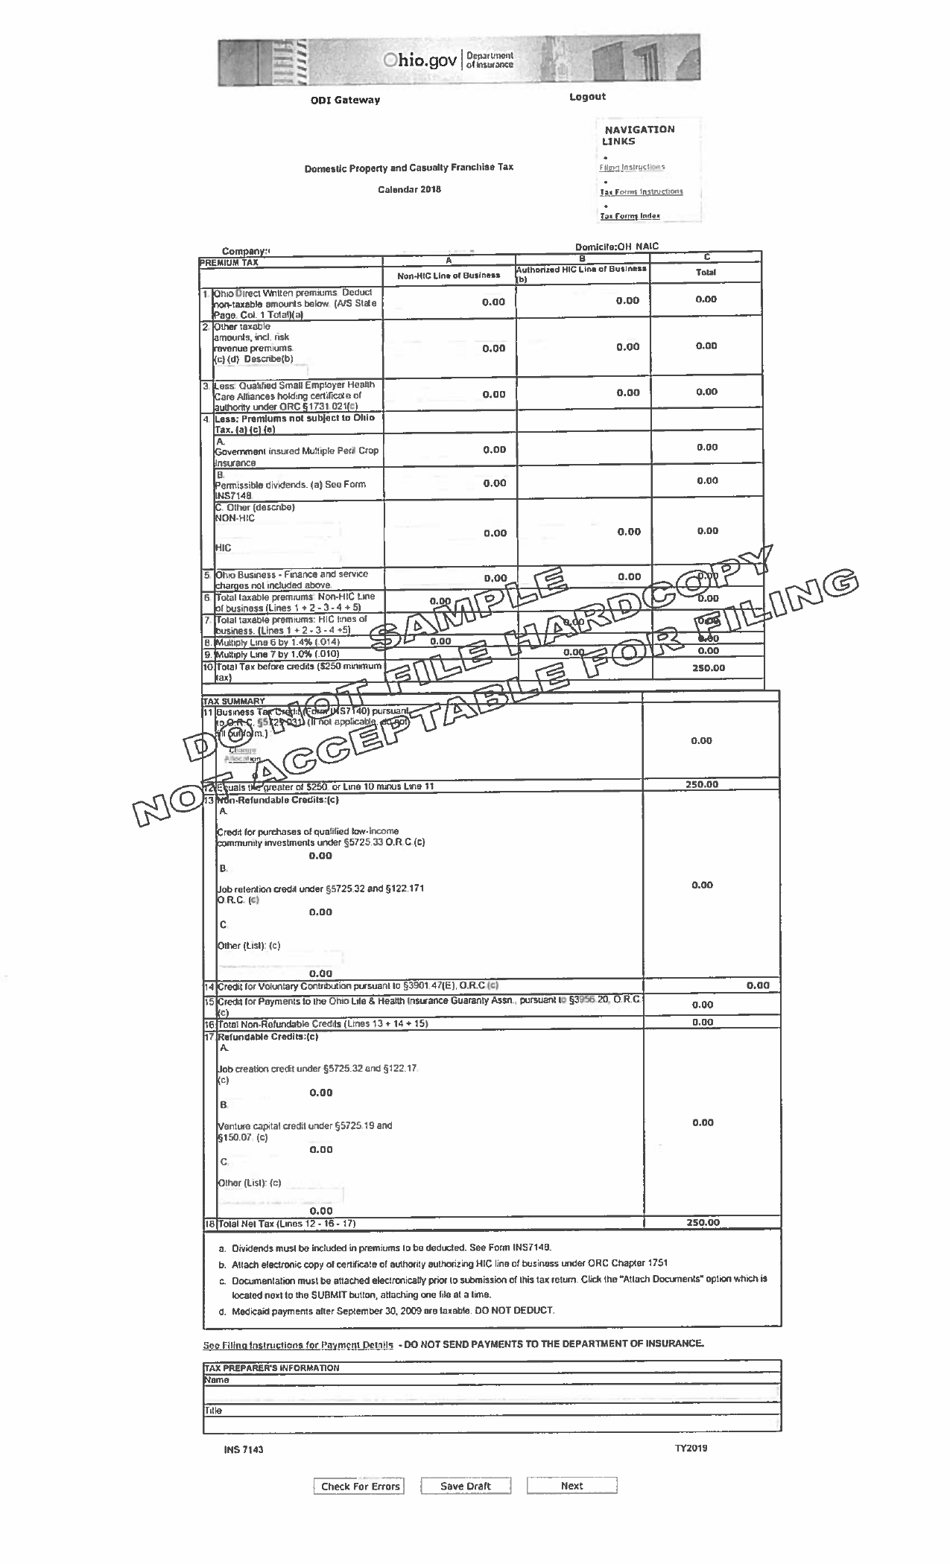 Sample Form INS7143 Domestic Property and Casualty Franchise Tax - Ohio, Page 1